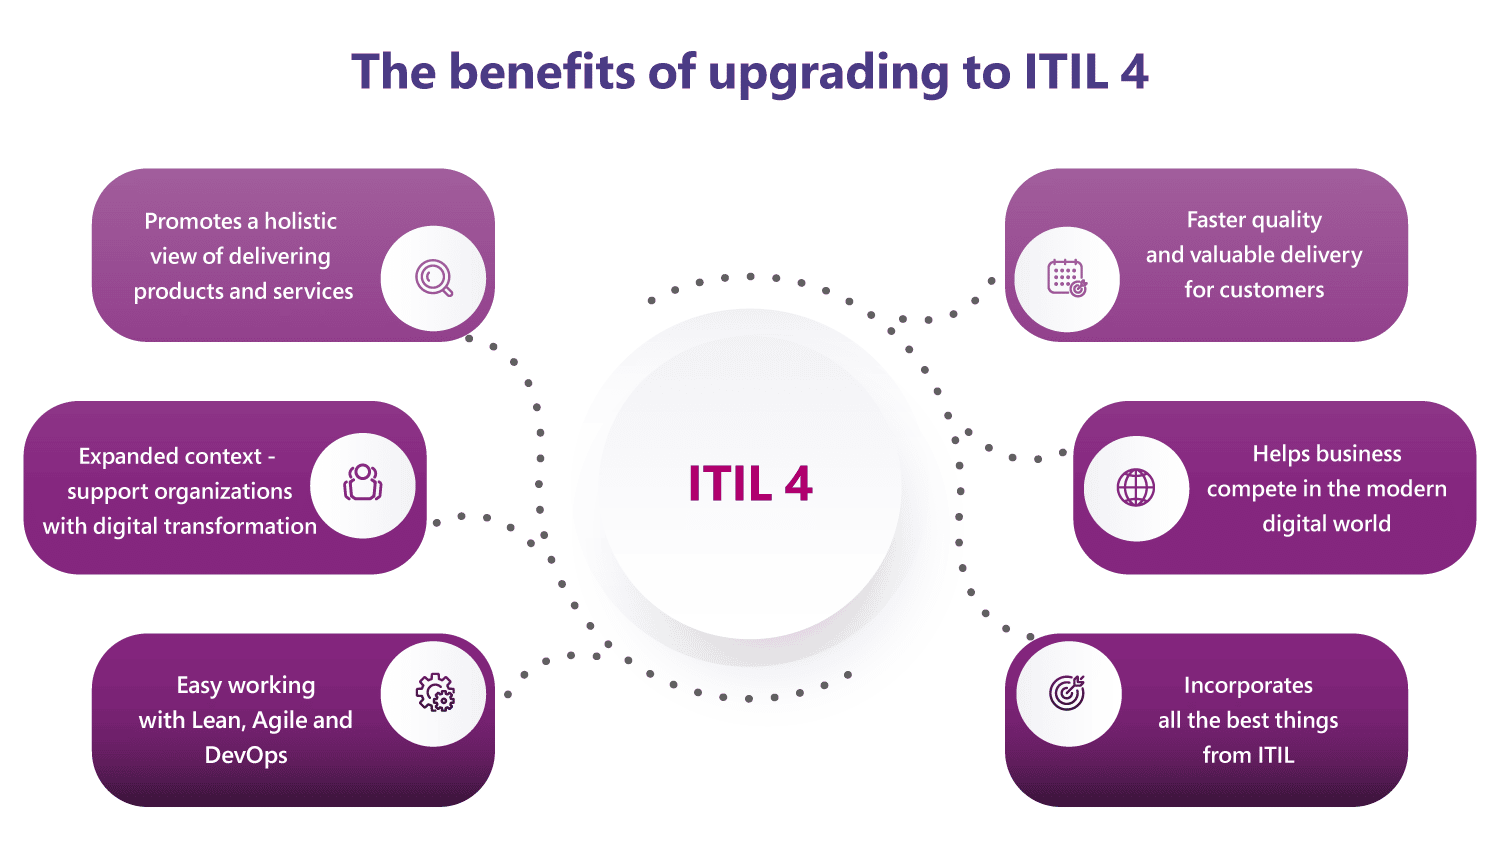 Upgrade to ITIL 4